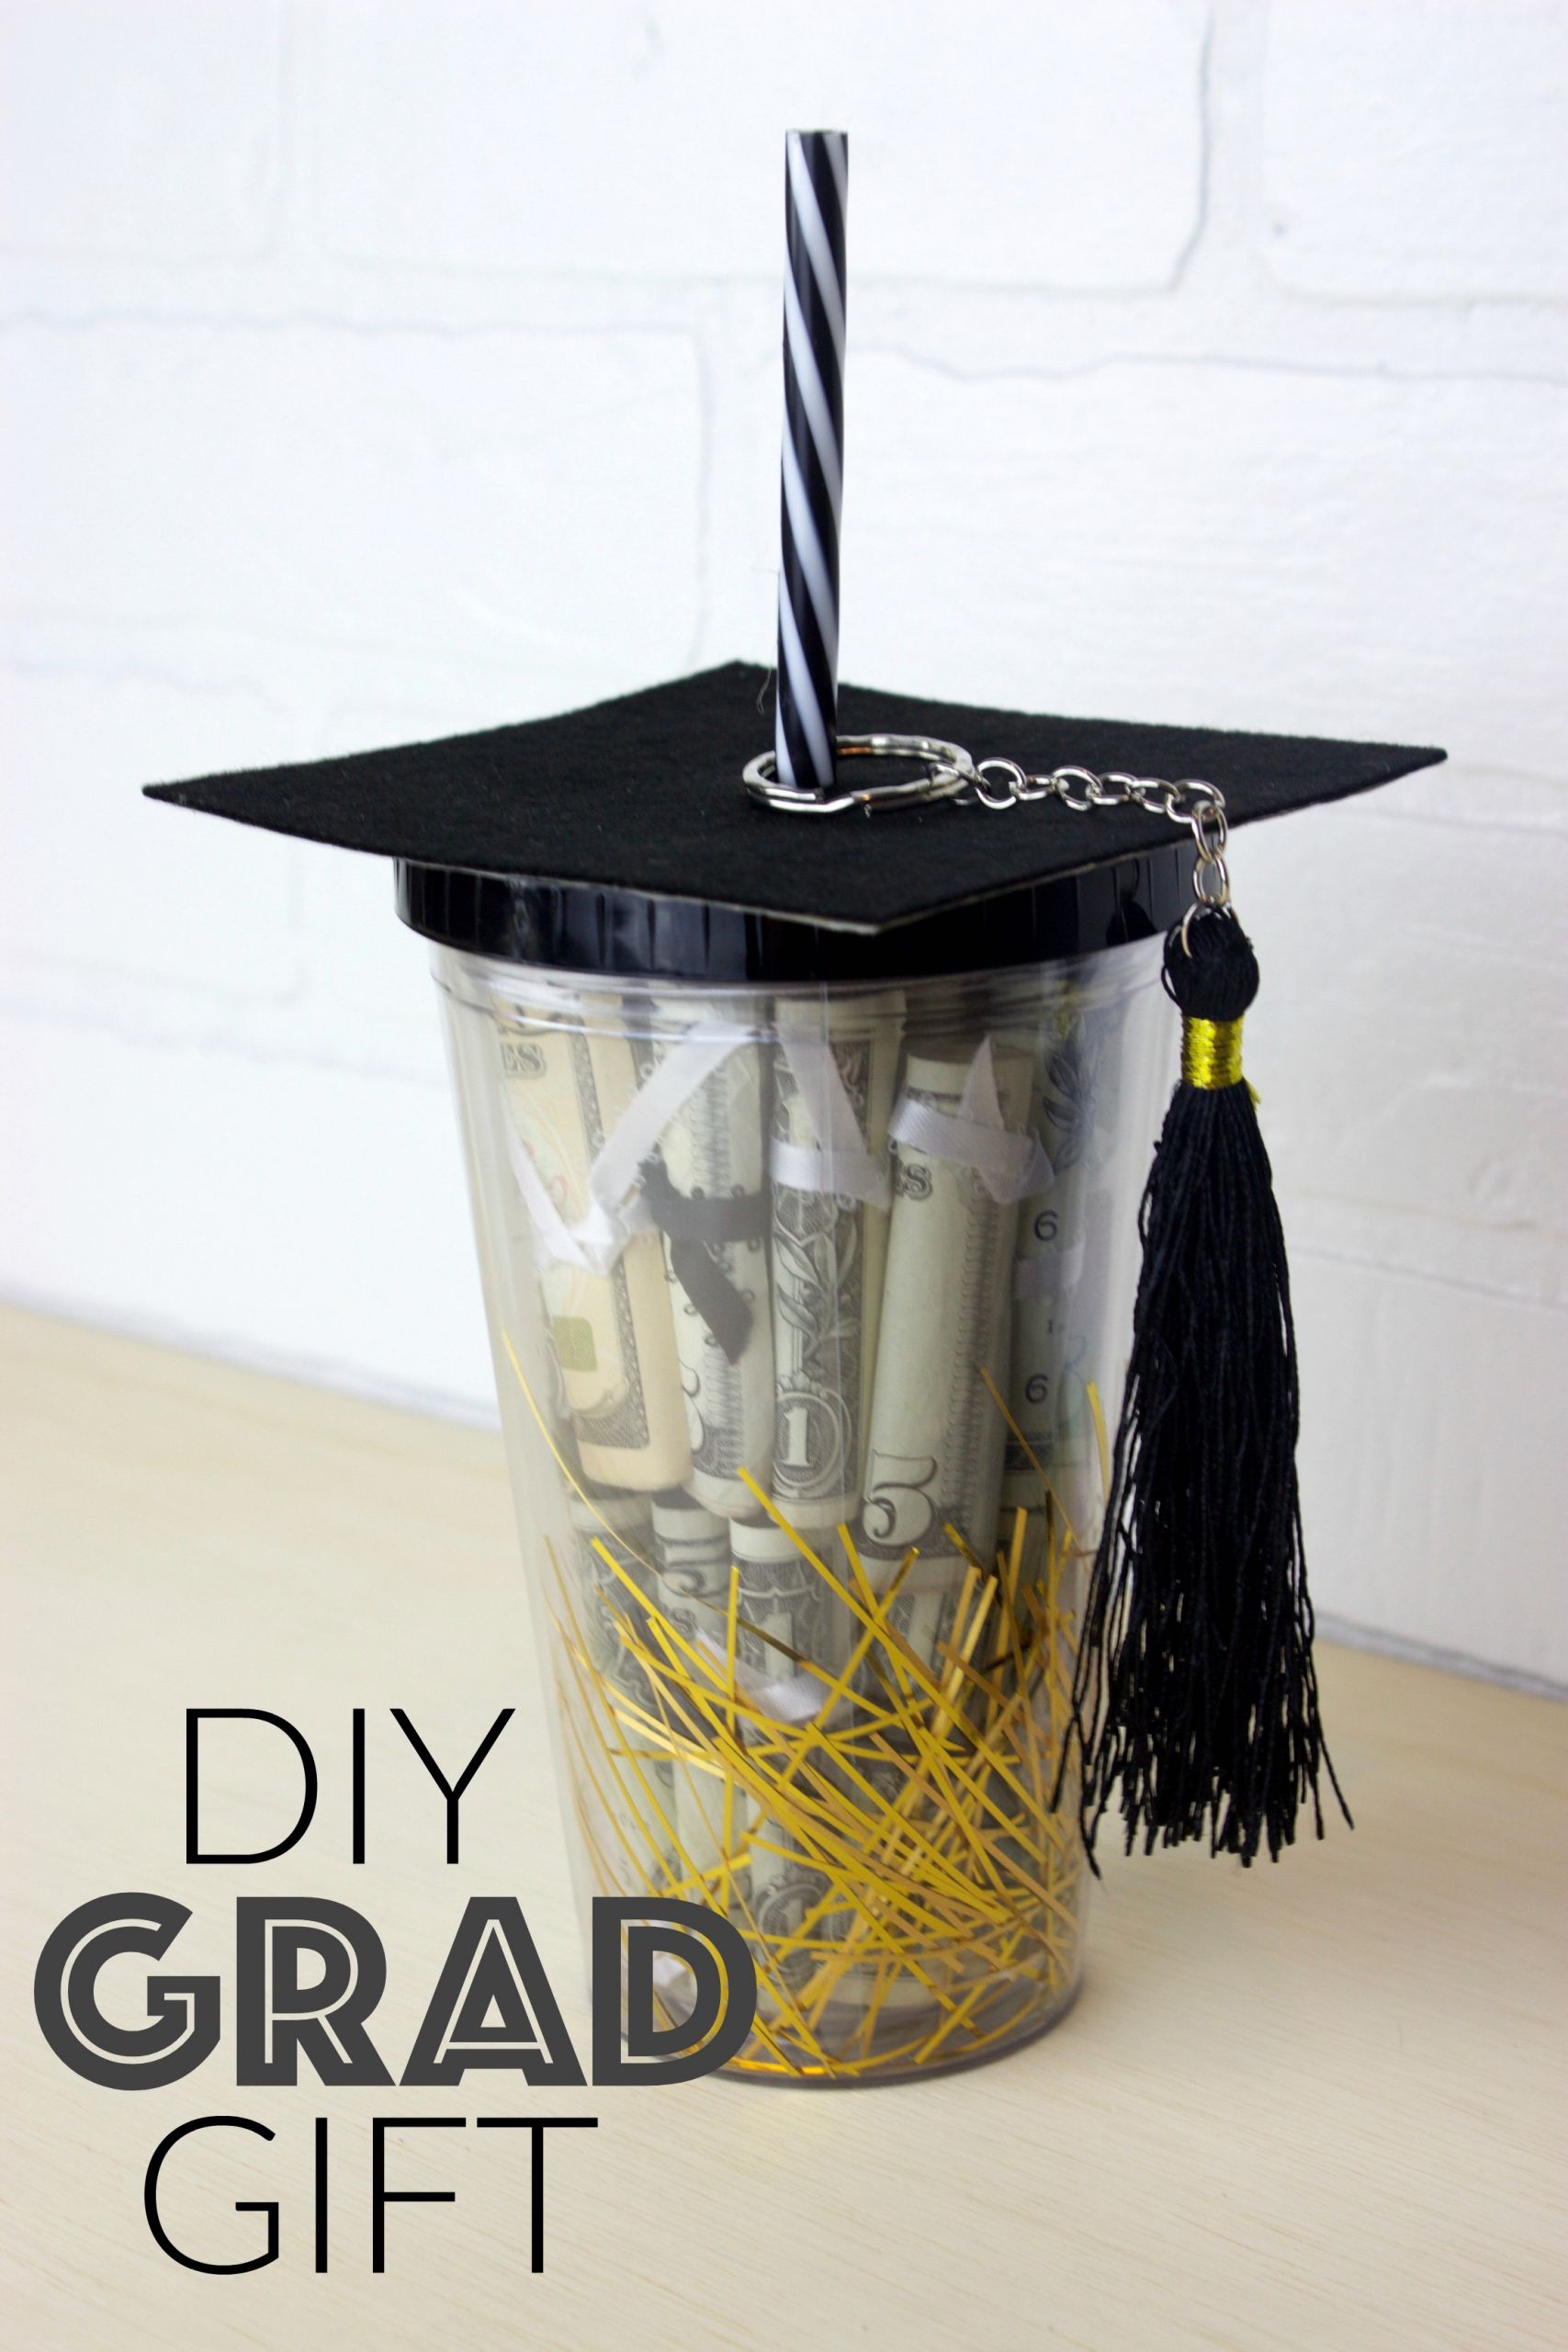 DIY Grad Gifts
 DIY Graduation Gift in a CupA Little Craft In Your Day